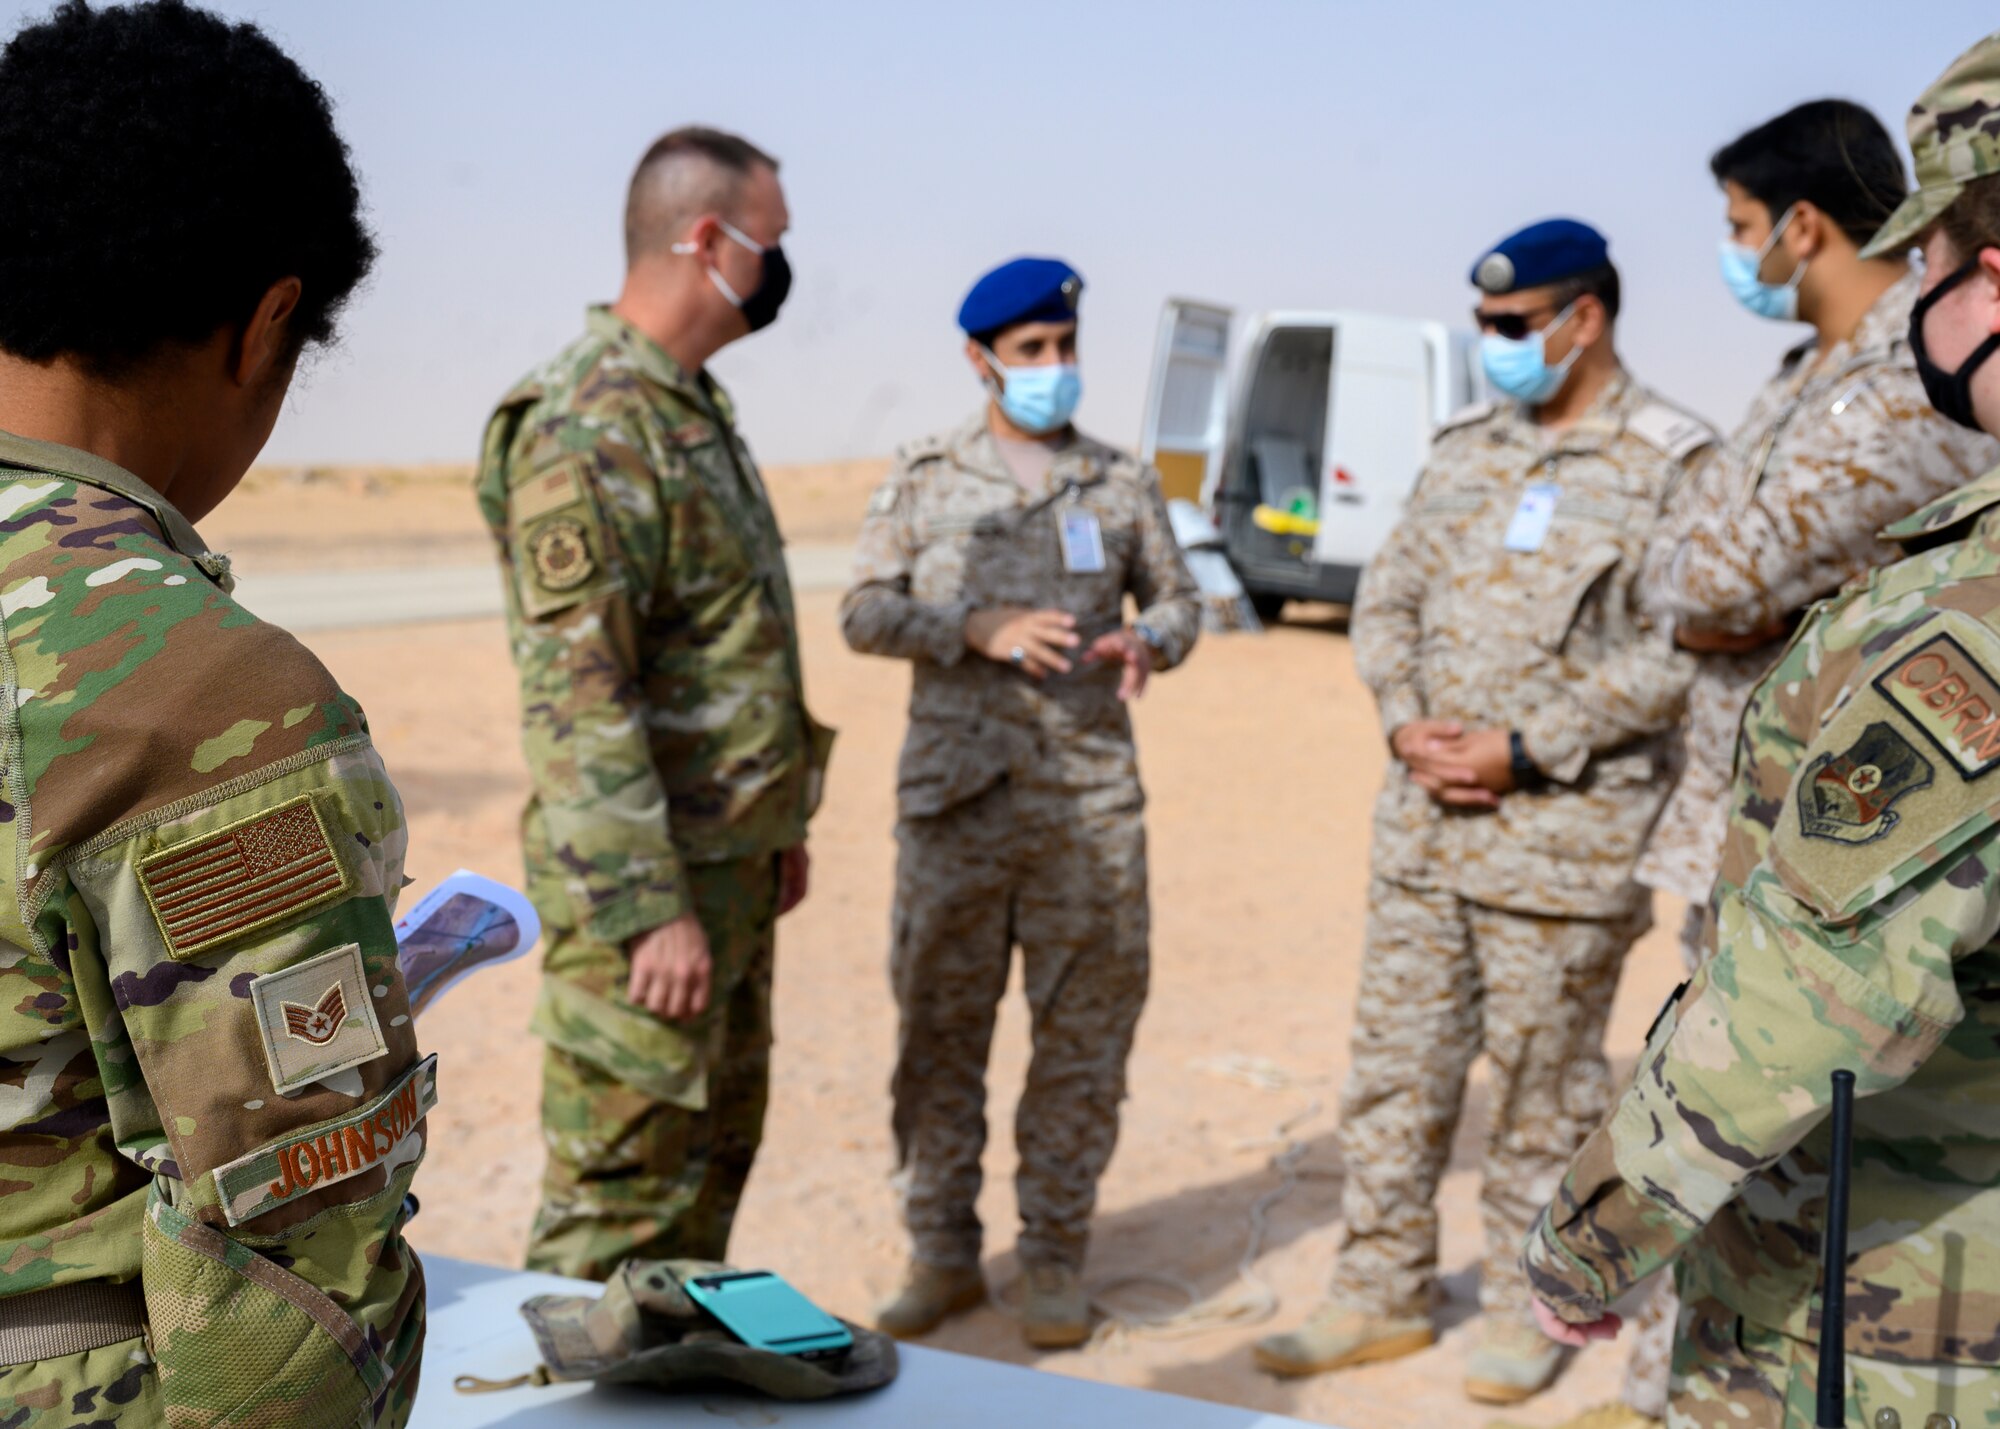 Royal Saudi Air Force personnel discuss the steps of a chemical, biological, radiological and nuclear response exercise with members of the 378th Civil Engineer Squadron emergency management flight, Prince Sultan Air Base, Kingdom of Saudi Arabia, May 26, 2021. The combined exercise demonstrates the emergency management integration between USAF and RSAF CBRN response units while also familiarizing each unit with the other’s techniques and procedures. (U.S. Air Force photo by Senior Airman Samuel Earick)